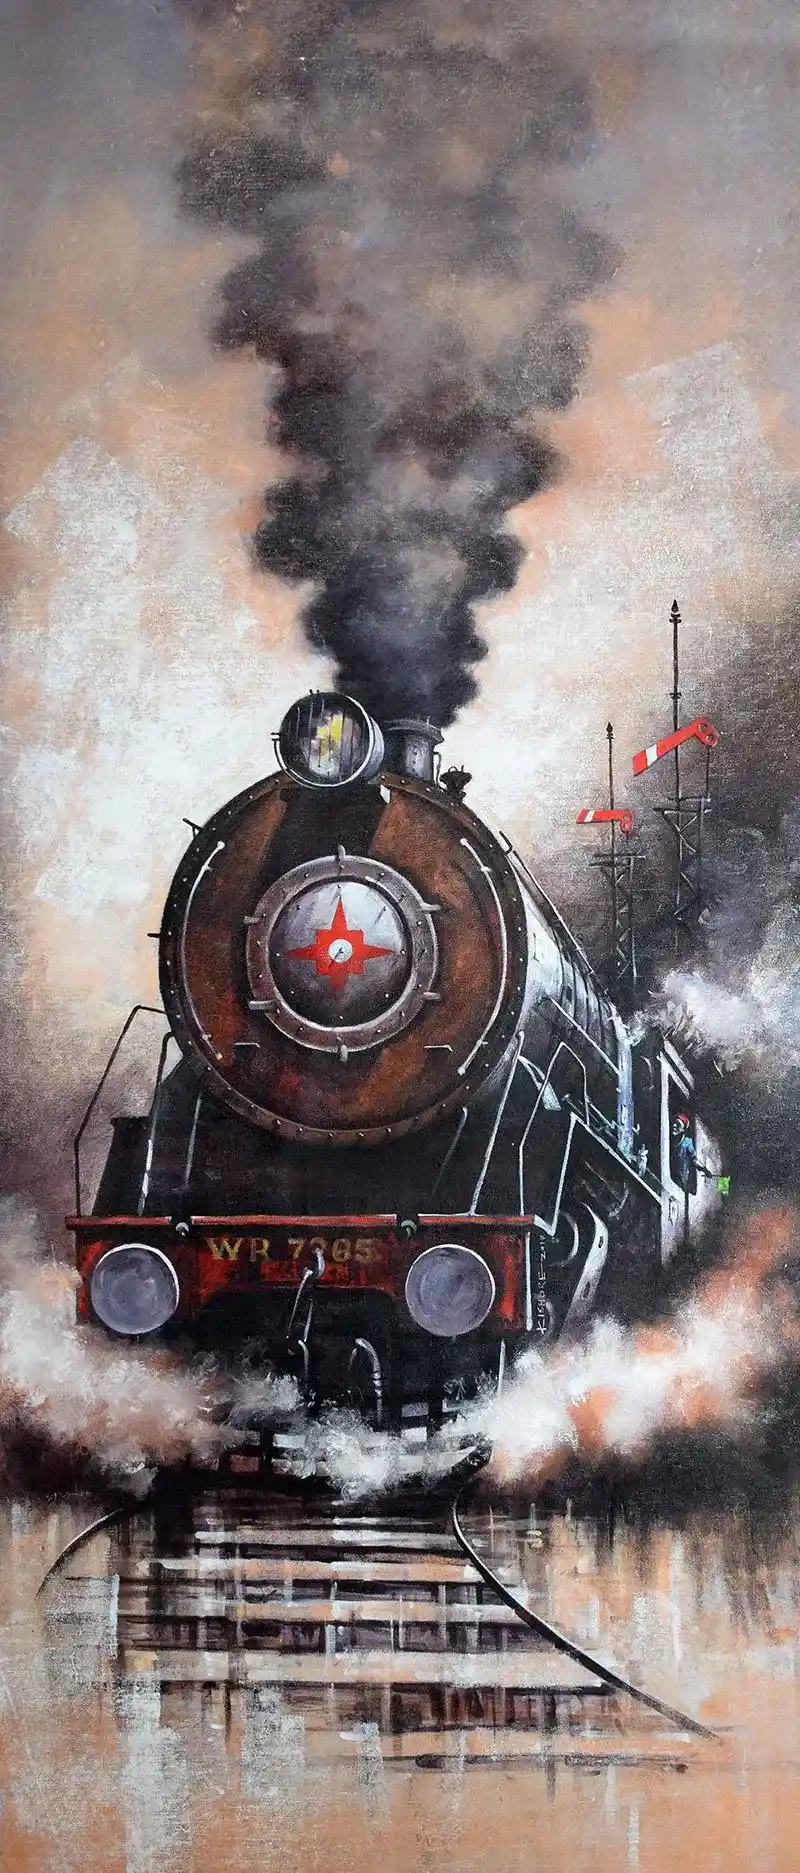 Kishore has detailed the various features of the locomotives in the paintings